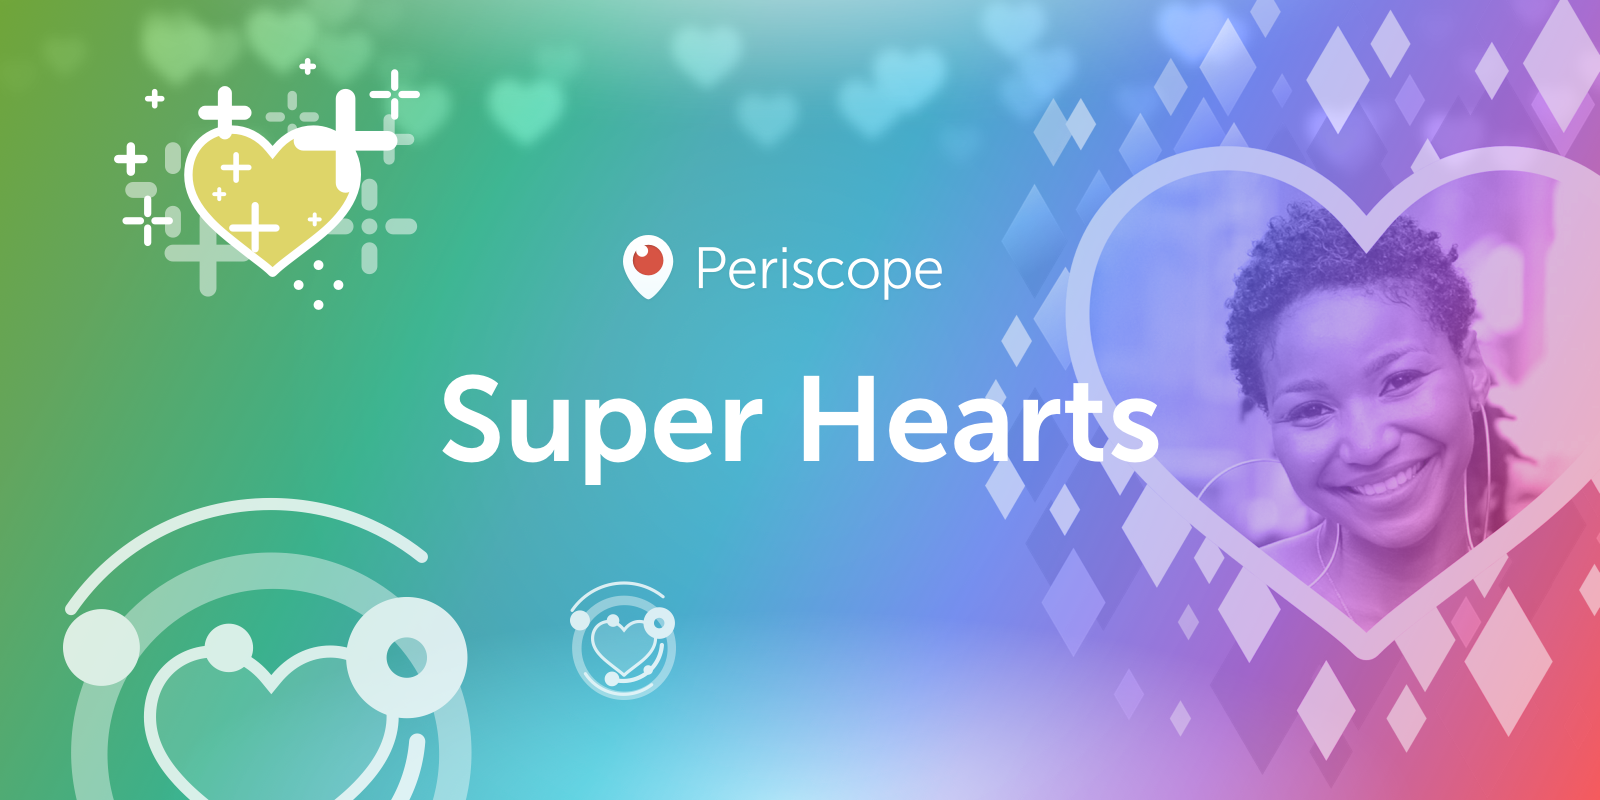 Super Hearts, New Way Show the Love | by Periscope | Medium